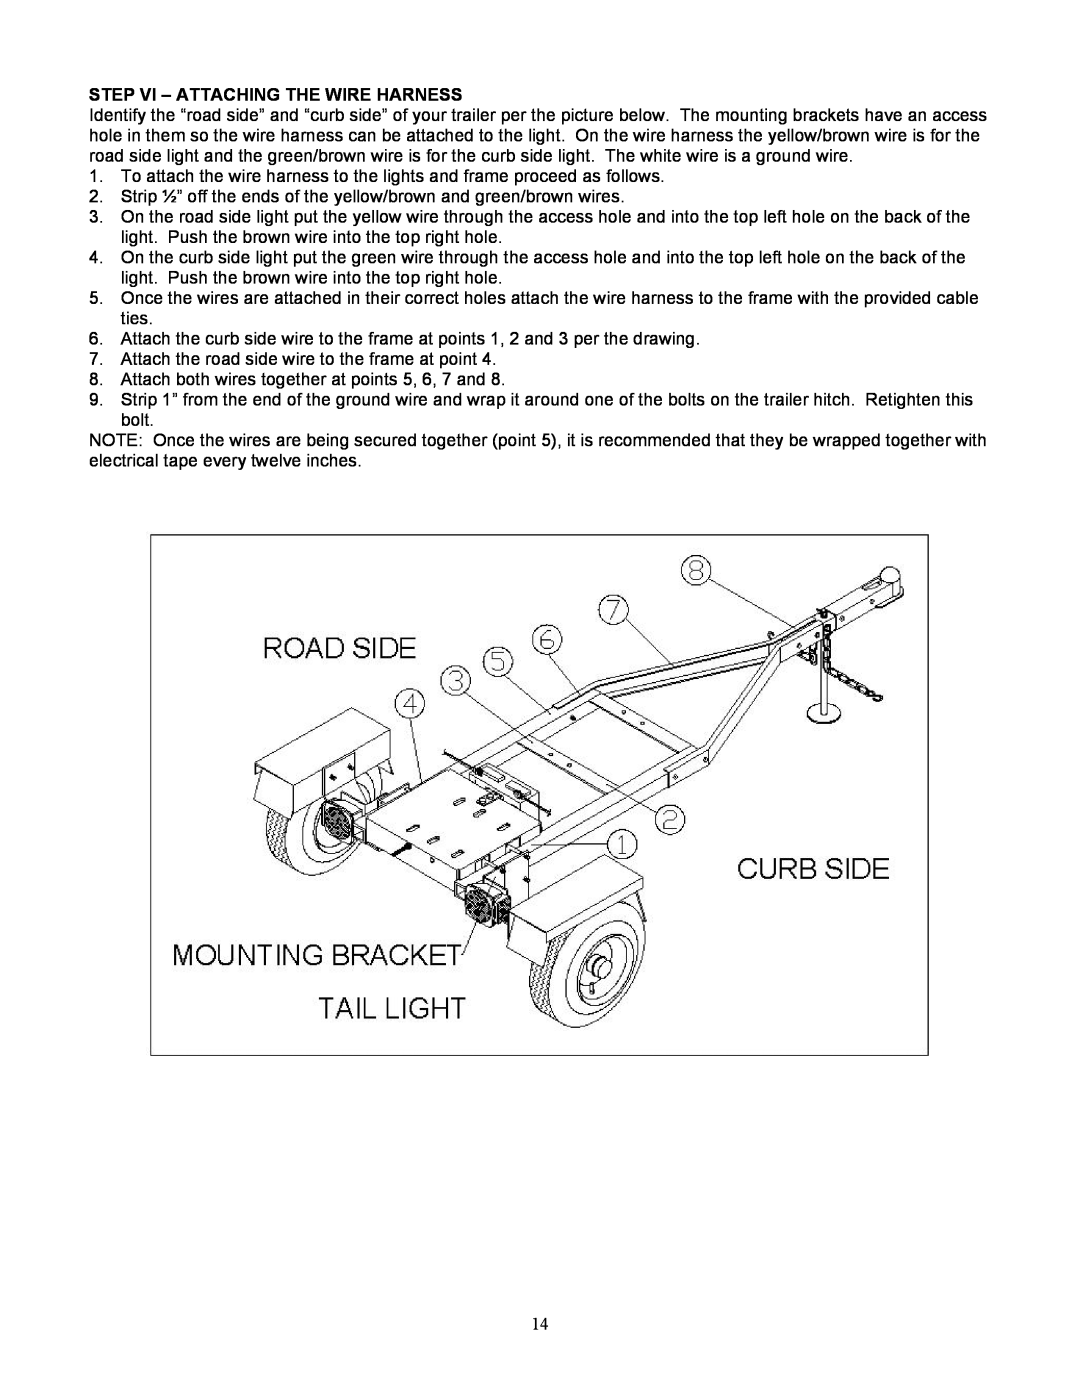 Country Home Products TLC18-CHP instruction manual Step Vi - Attaching The Wire Harness 